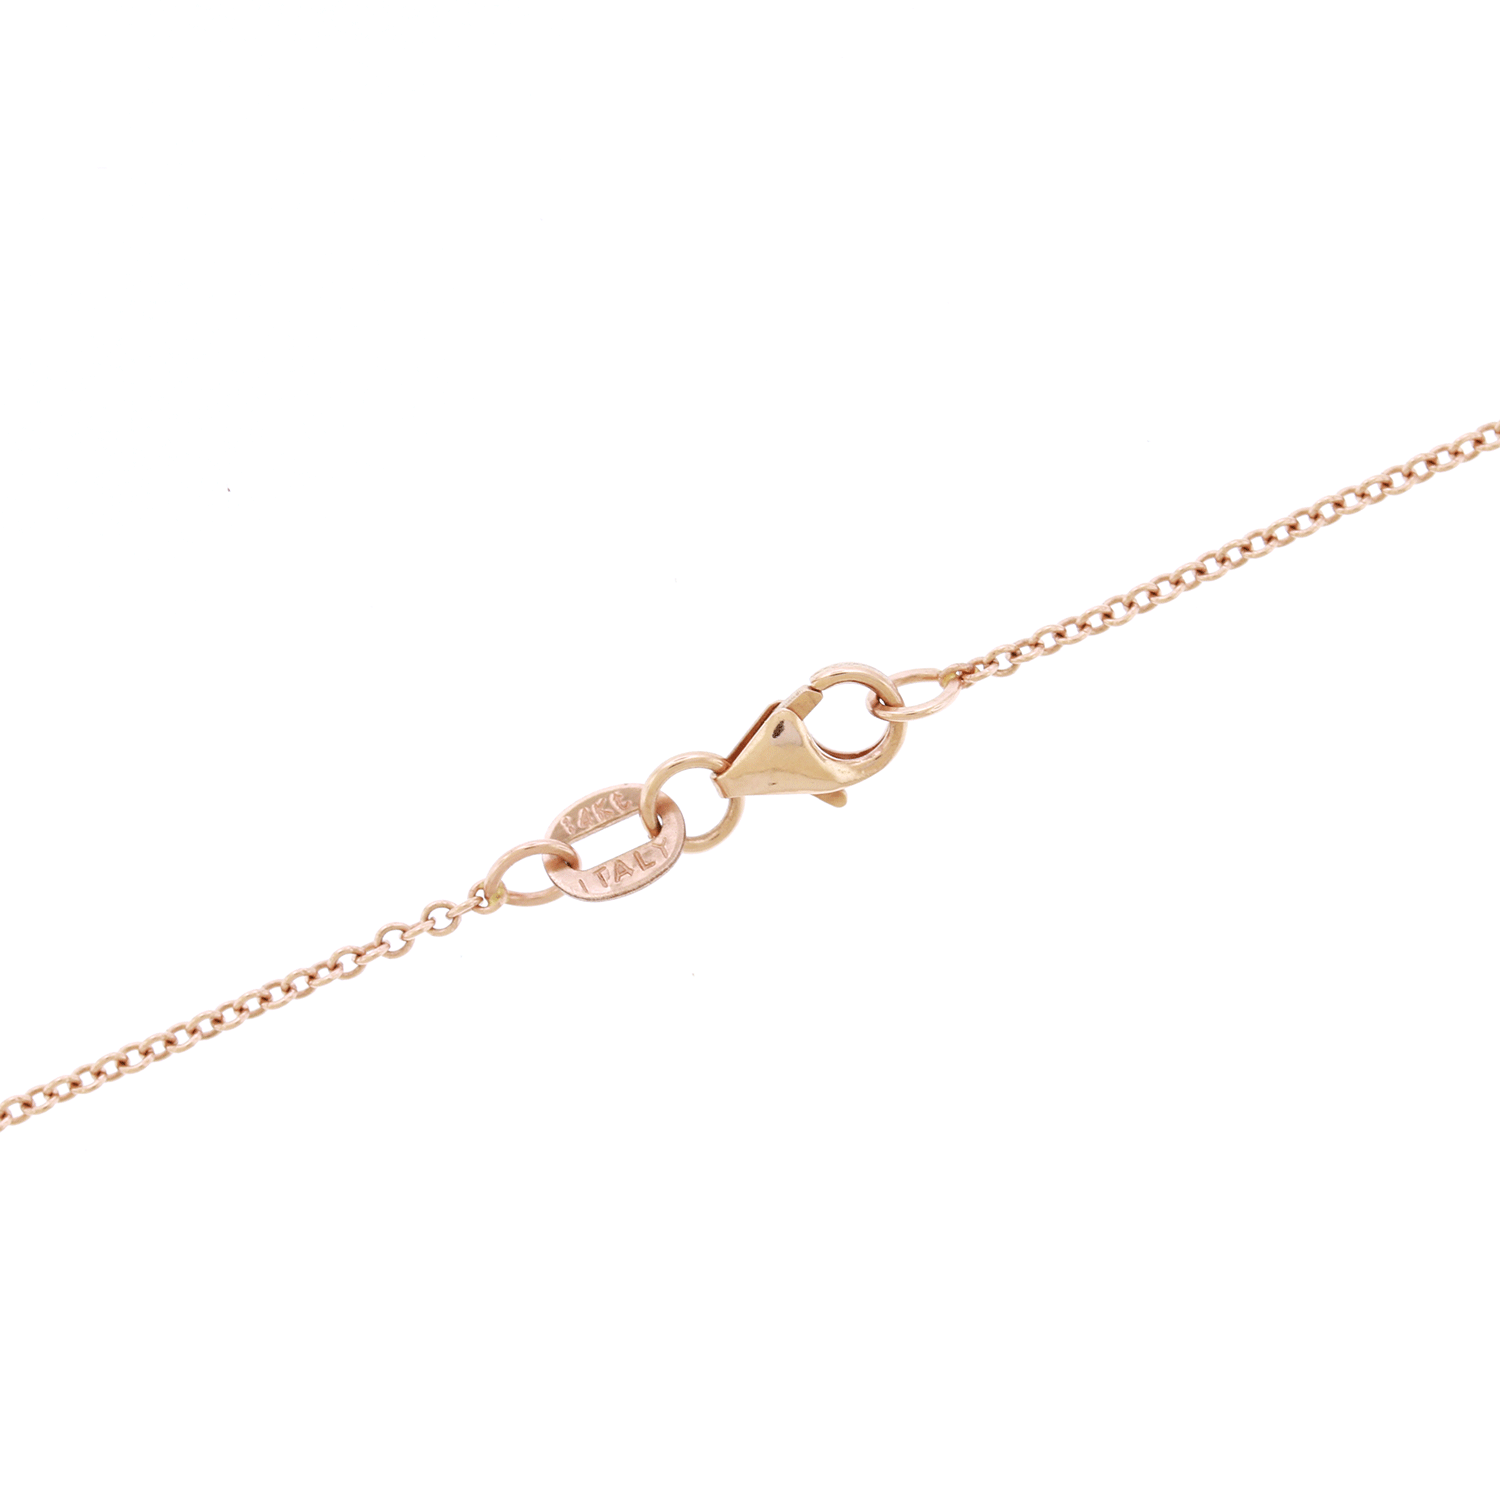 Old European Natural Diamond Solitaire Necklace - 14K Rose Gold (1/2ct)